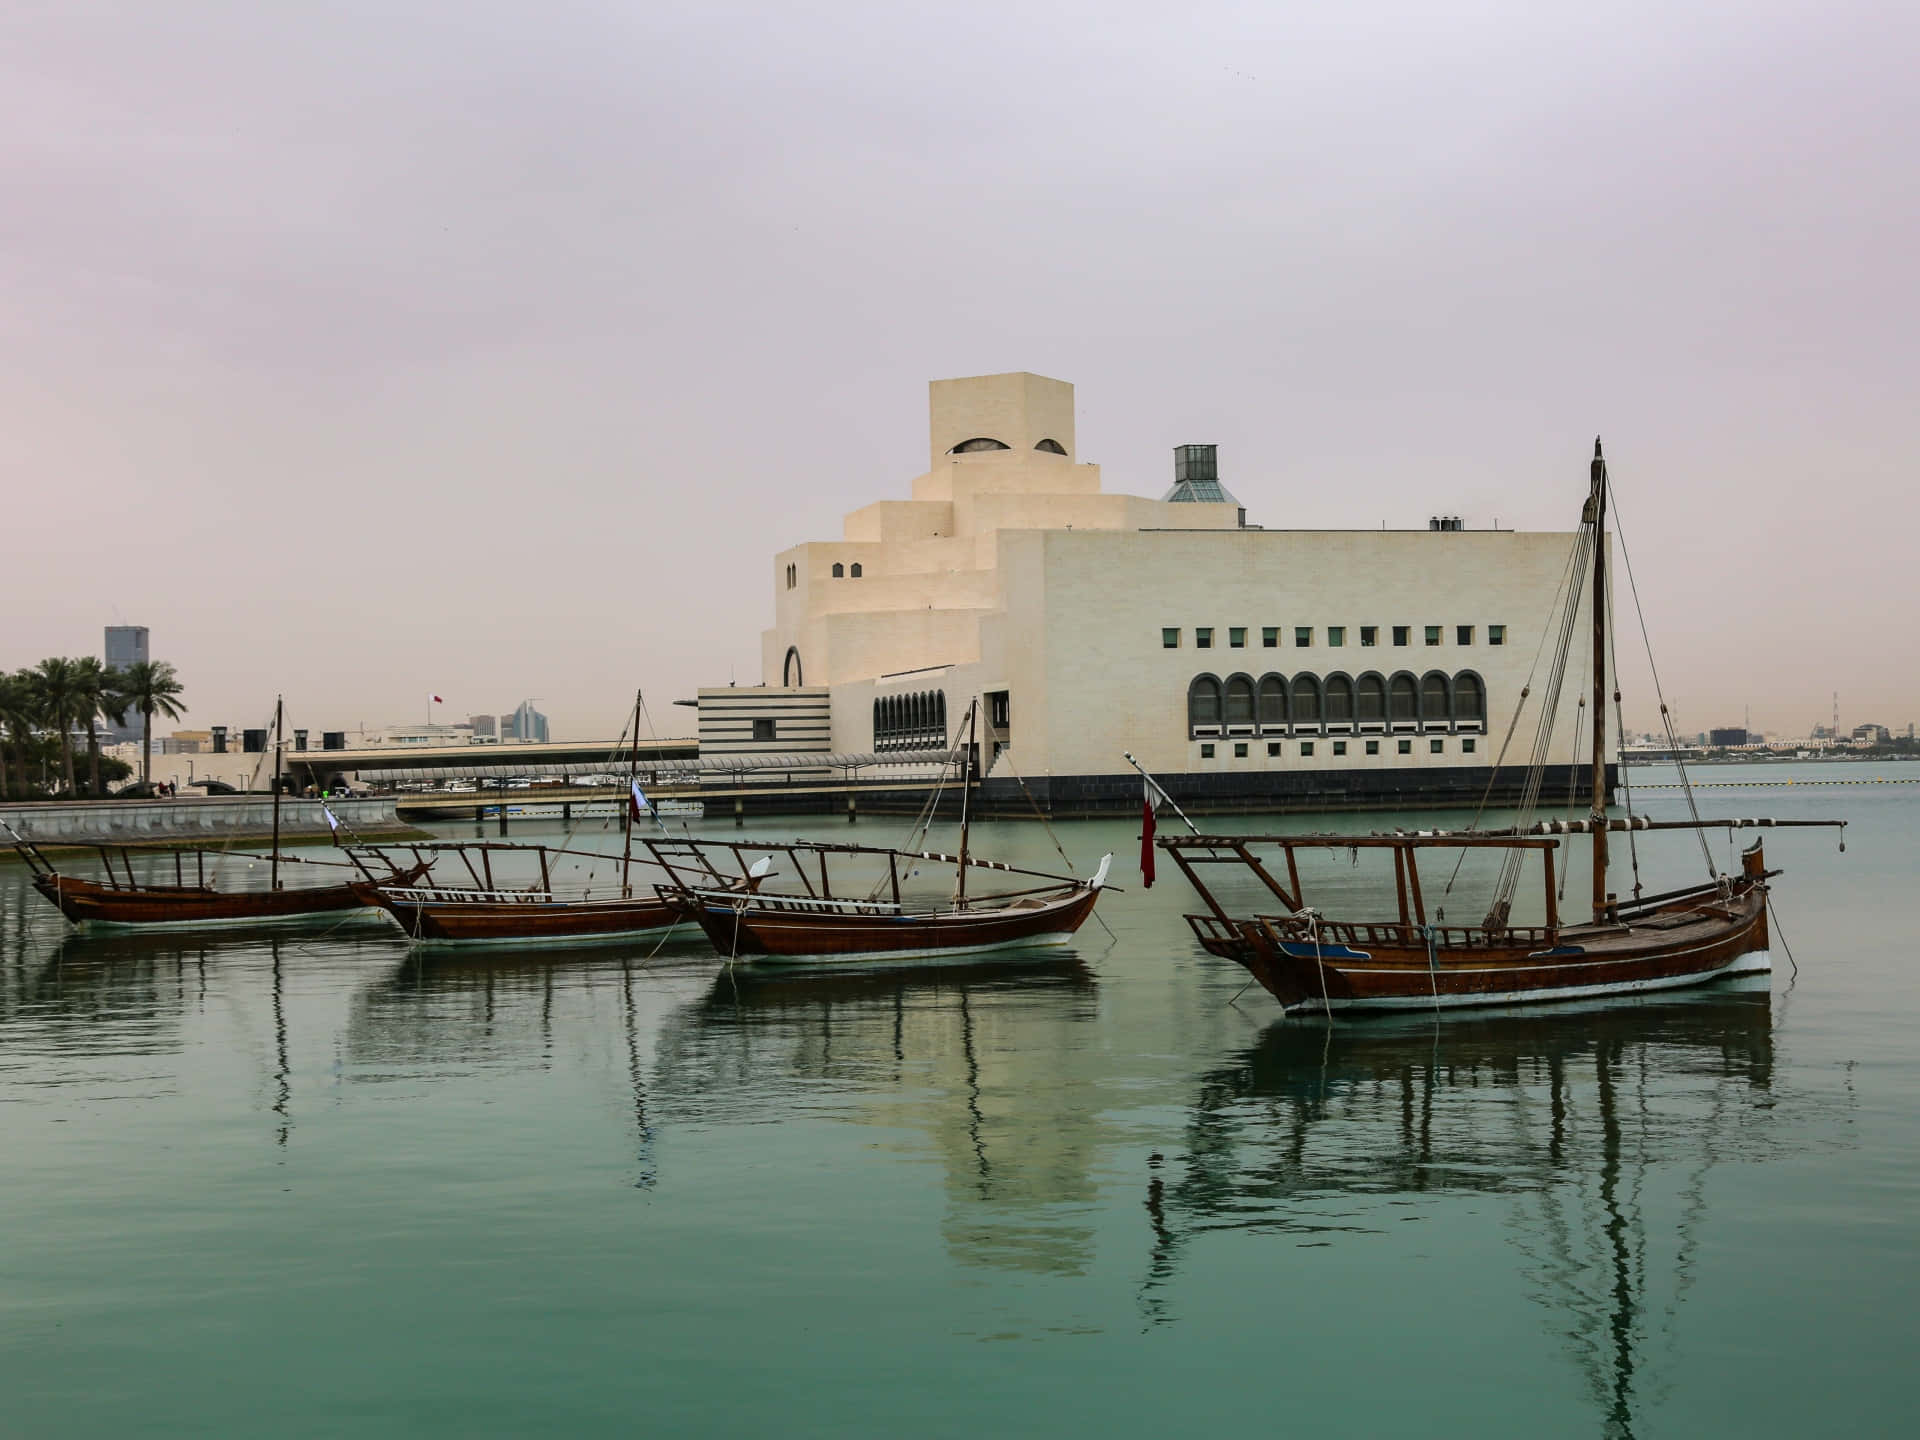 Majestic view of the Museum of Islamic Art with serene boats in the forefront, Doha, Qatar. Wallpaper